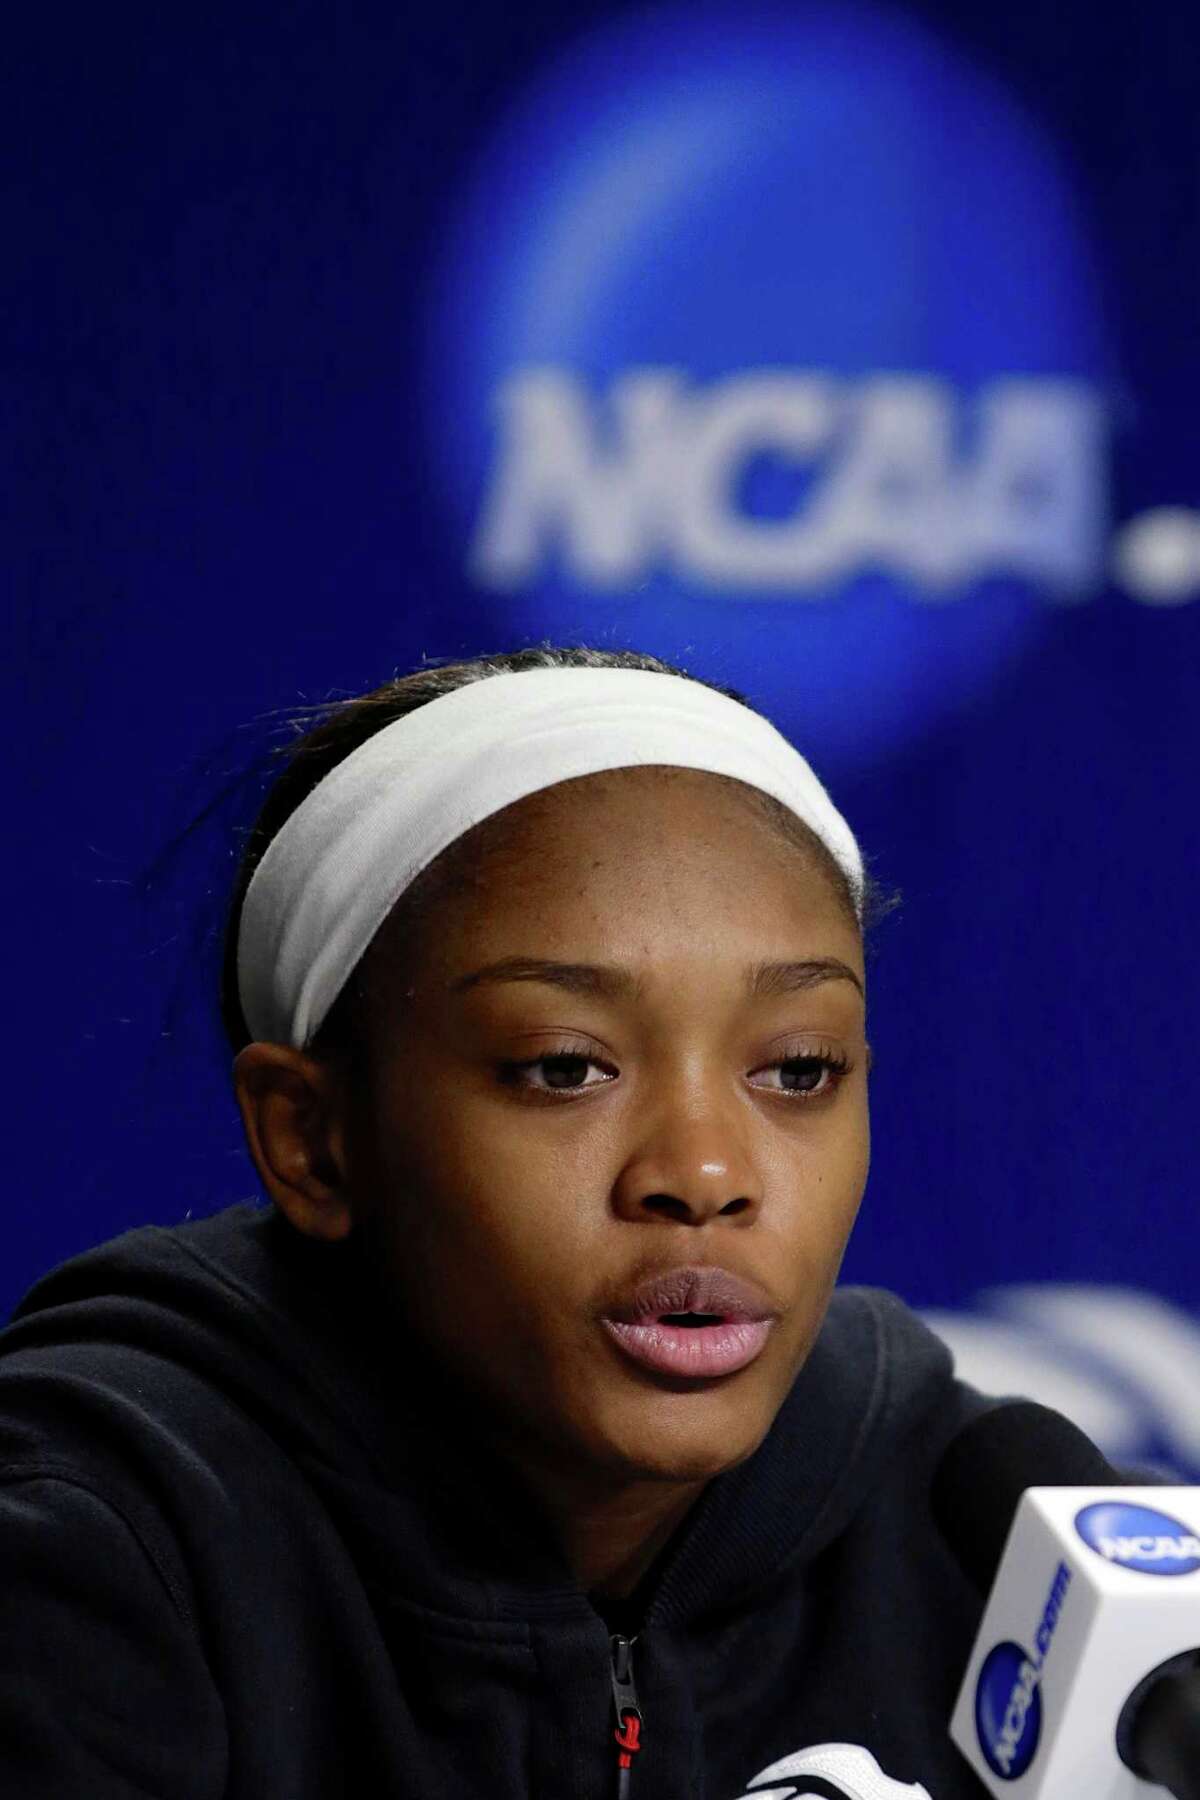 Texas A&M's Courtney Walker speaks during a news conference, Sunday, March 30, 2014, ahead of a regional finals game in the NCAA women's college basketball tournament in Lincoln, Neb. Texas A&M will play Connecticut in the finals on Monday. (AP Photo/Nati Harnik)